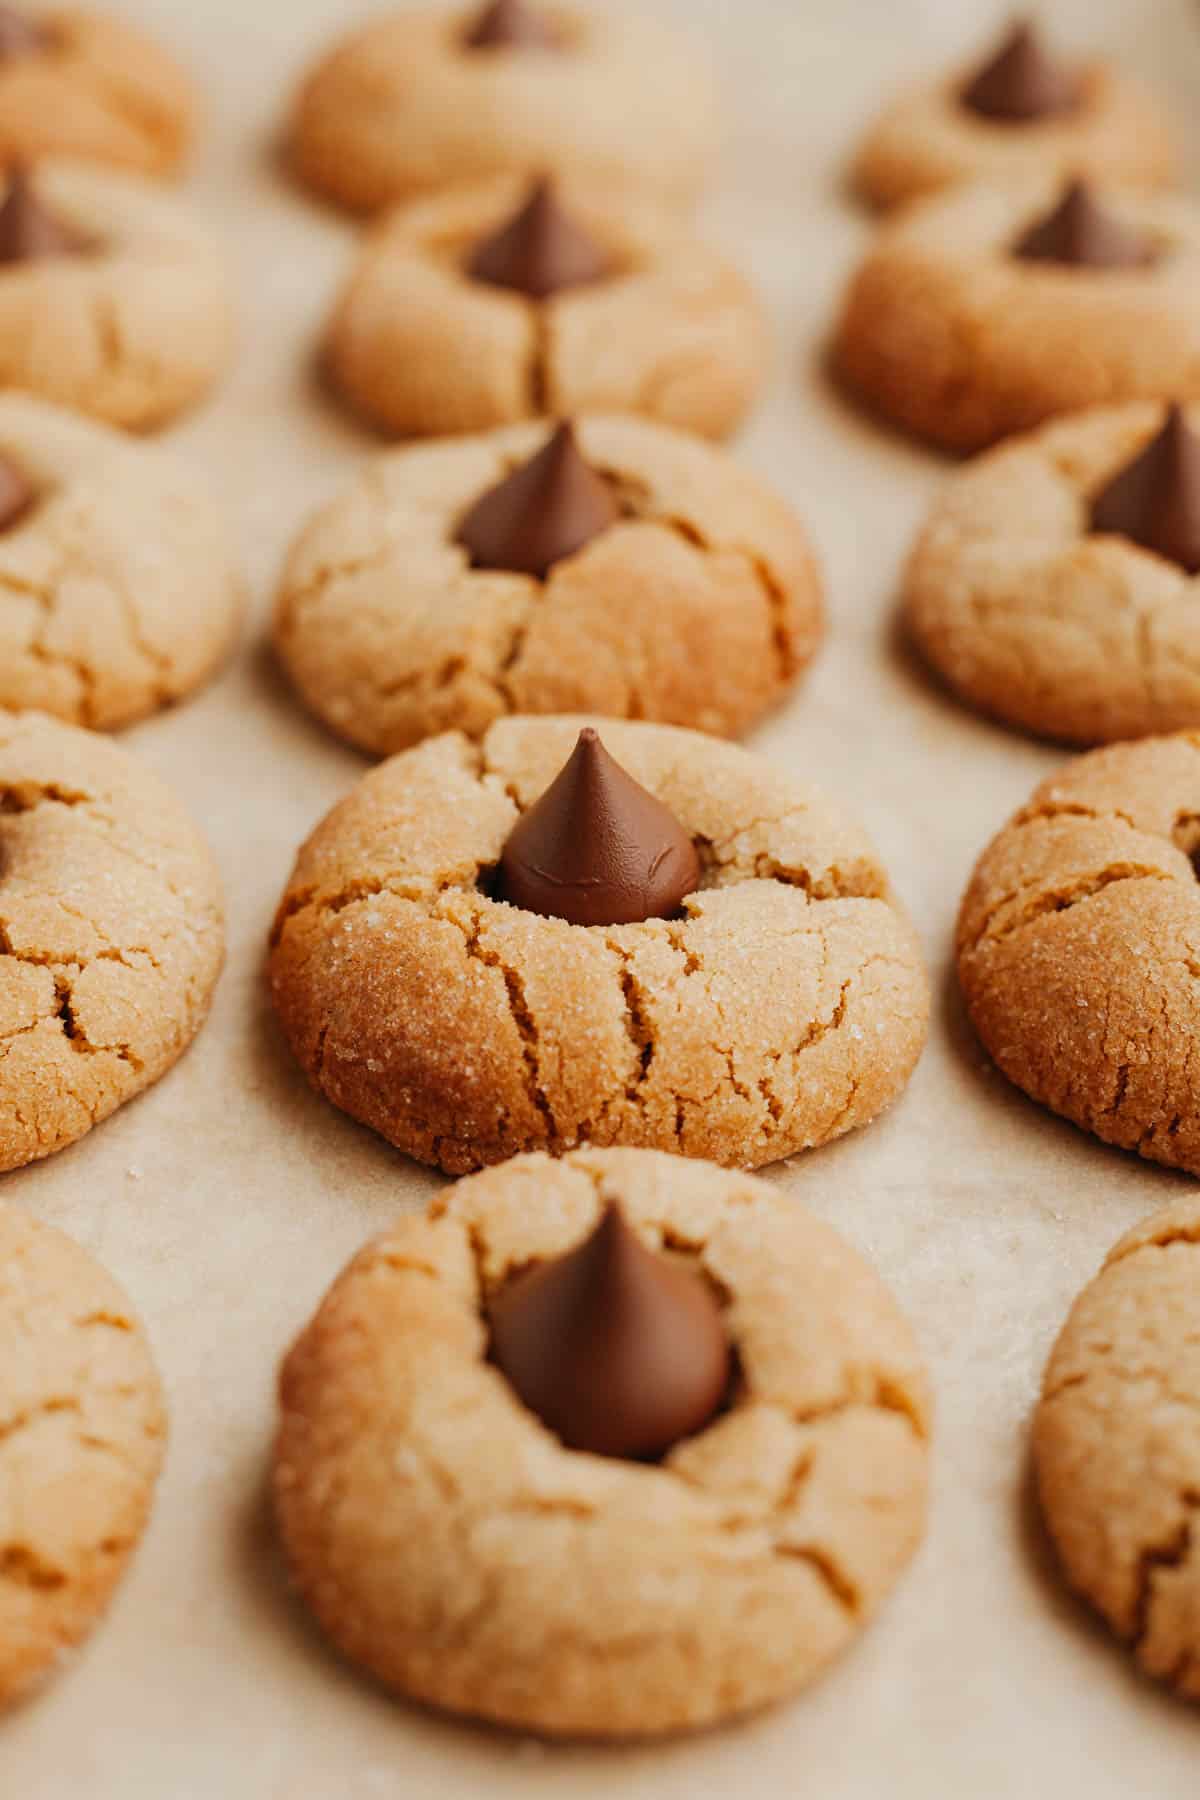 Three rows of peanut butter blossoms on parchment paper.